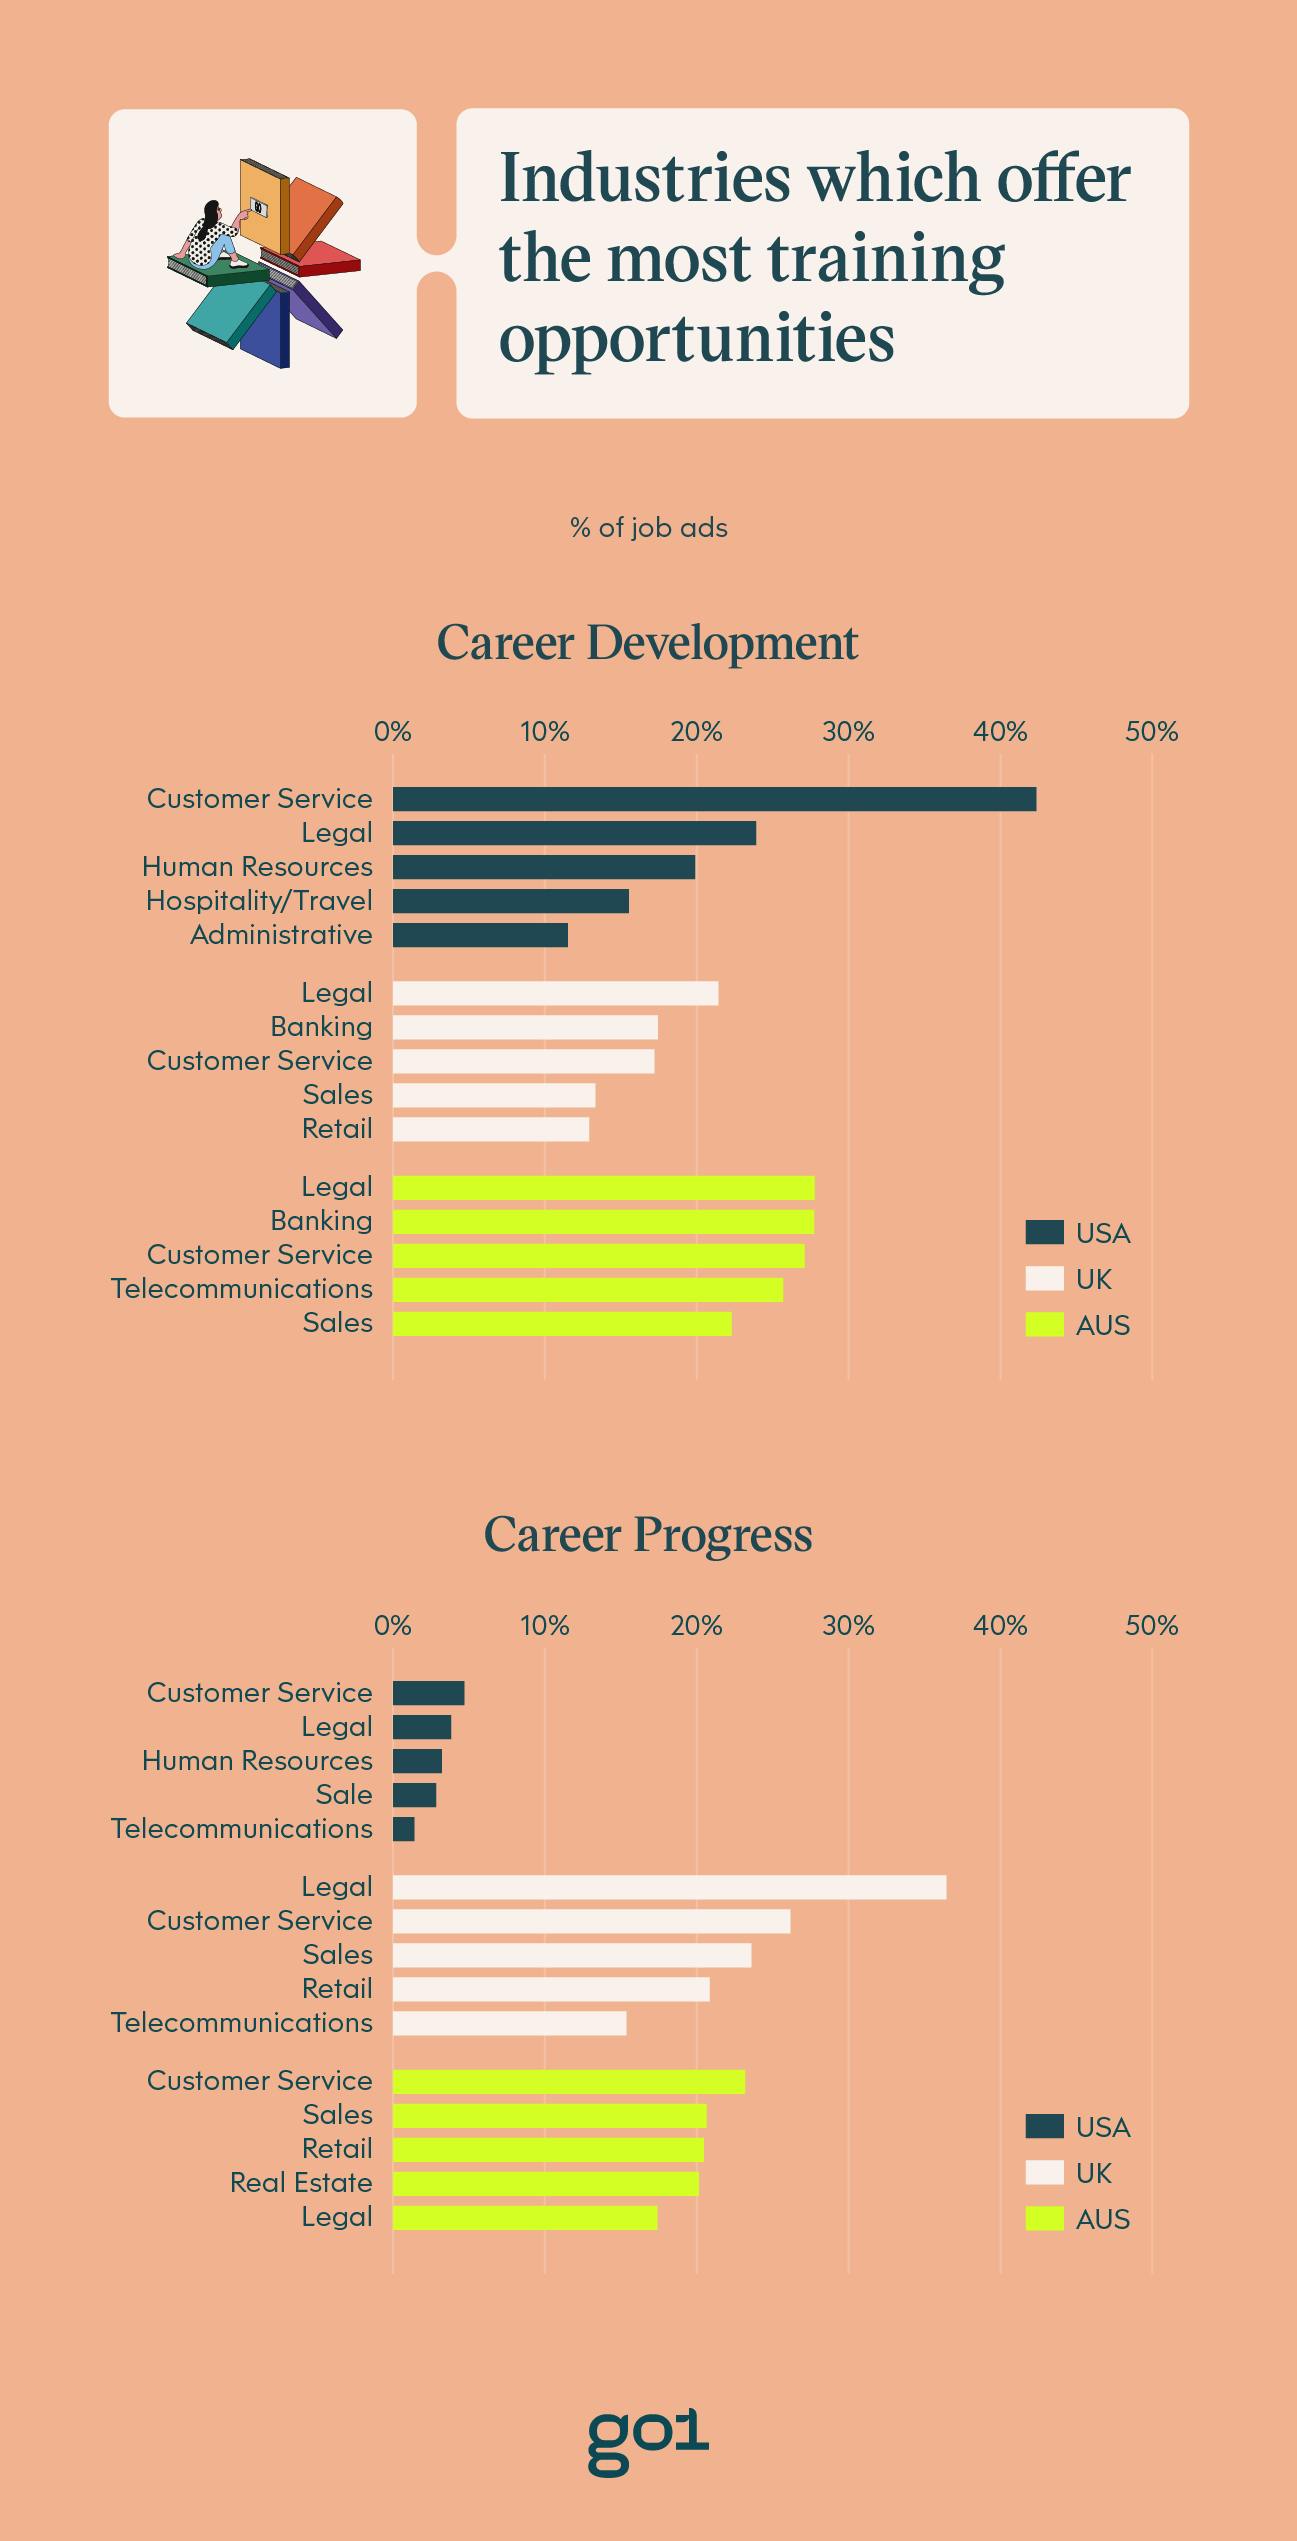 Bar charts illustrating the industries which offer the most training opportunities